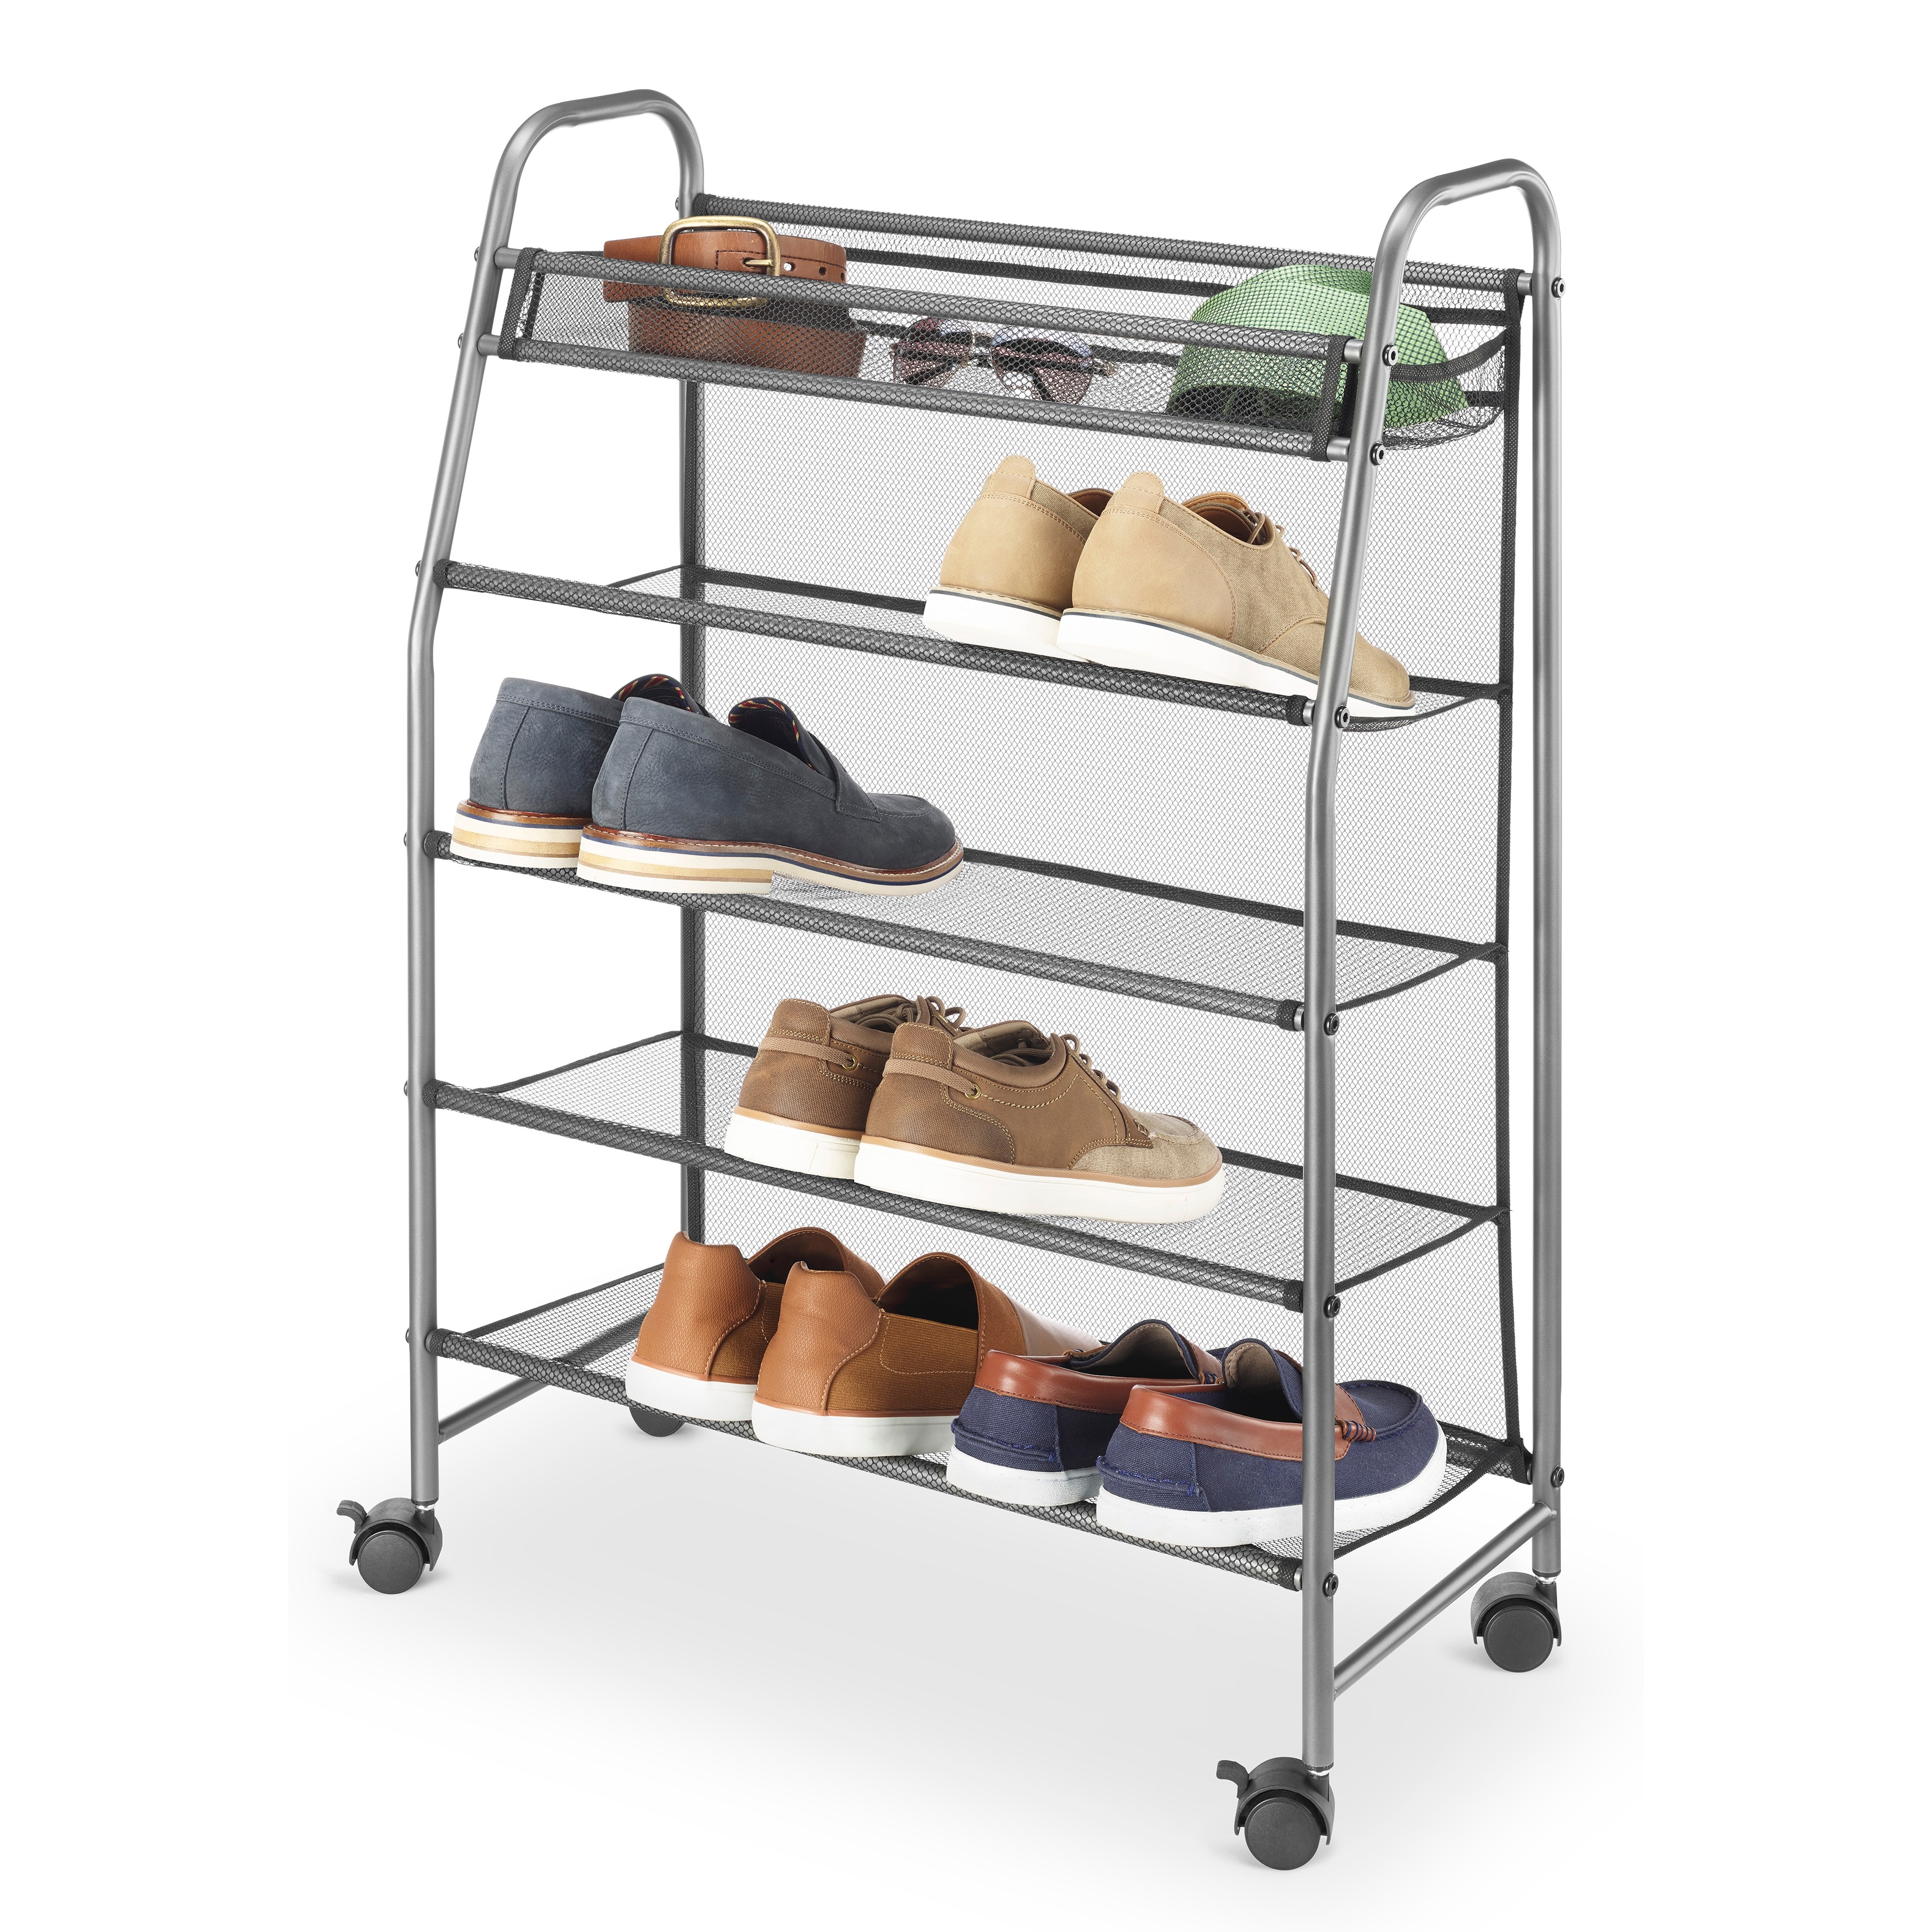 https://ak1.ostkcdn.com/images/products/is/images/direct/4f0c25c54bf8496fce3dd13fabe21fb247928f3a/Whitmor-12-Pair-Rolling-Shoe-Rack-with-Top-Tray---Gray.jpg